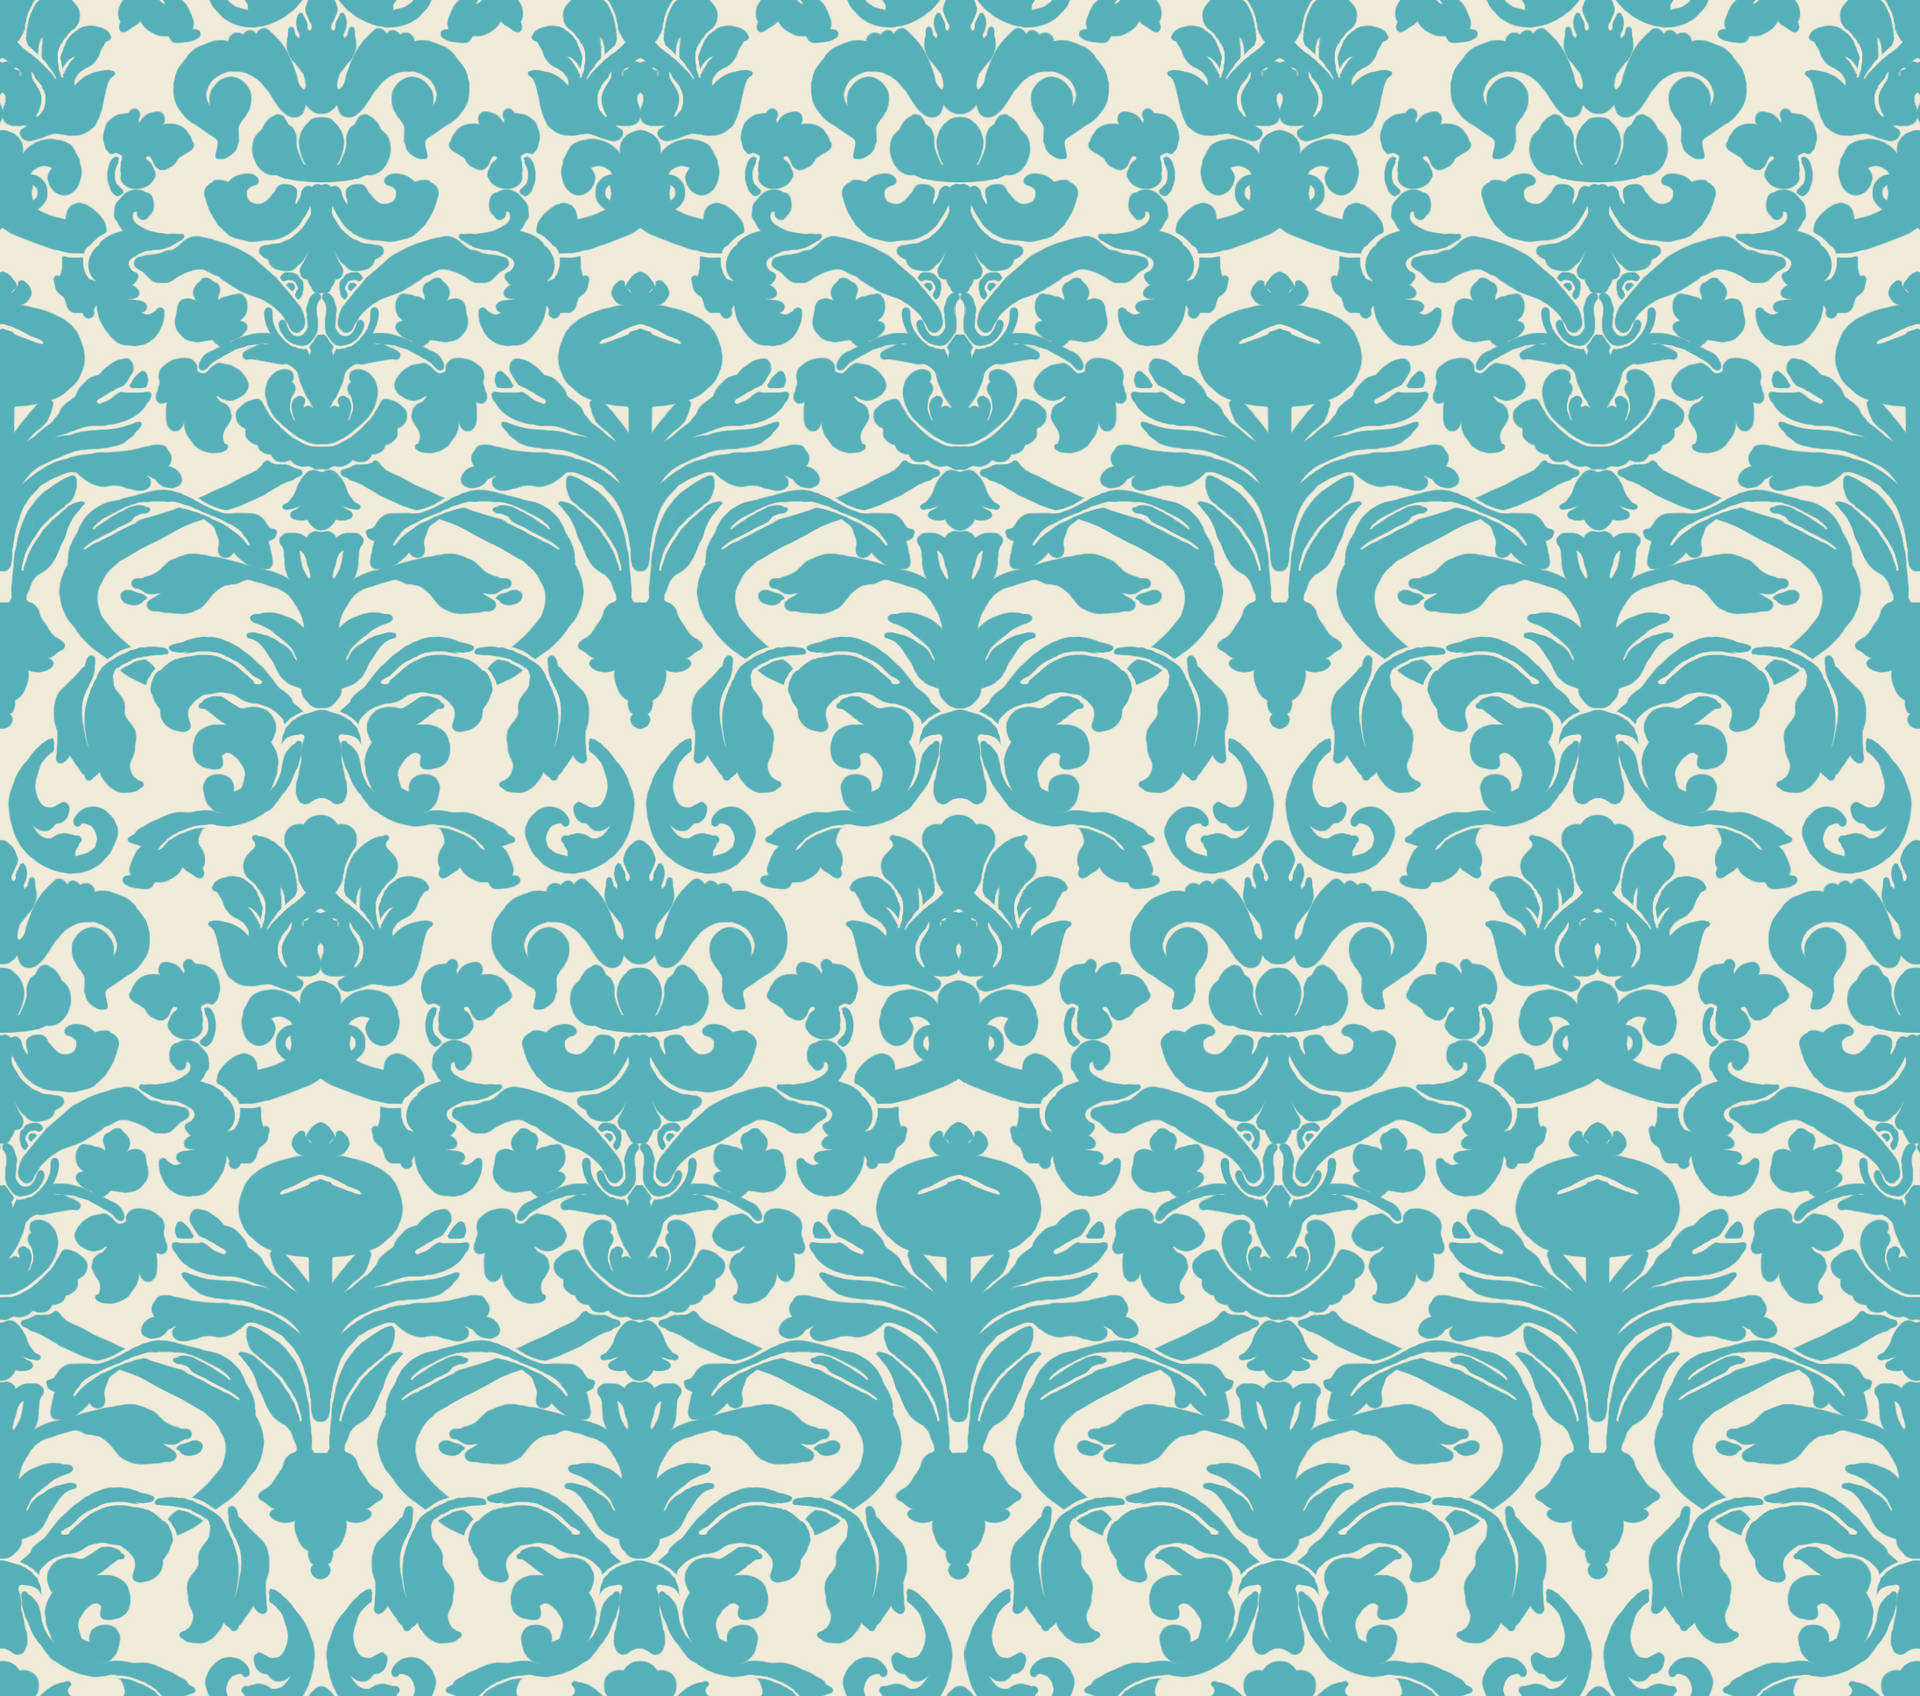 Intricate Damask Print Aesthetic Teal